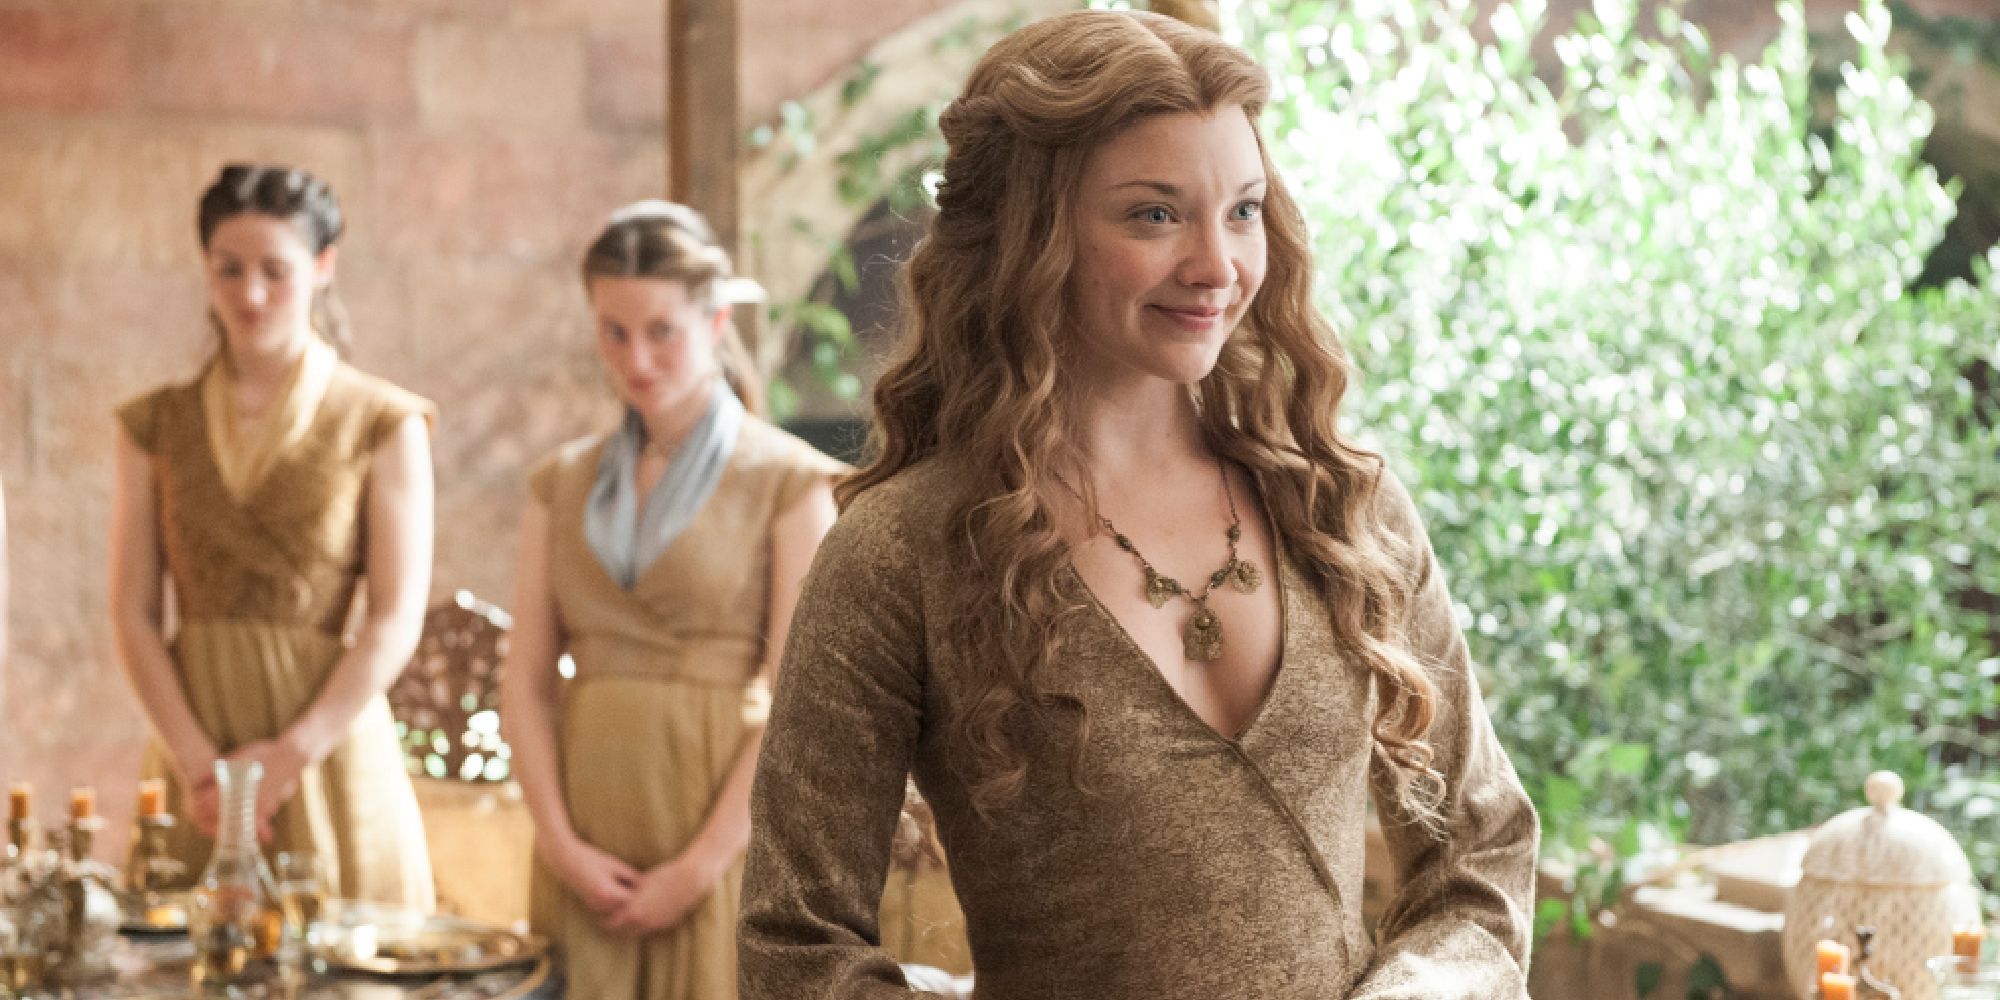 Natalie Dormer as Margaery Tyrell smiling widely in Game of Thrones